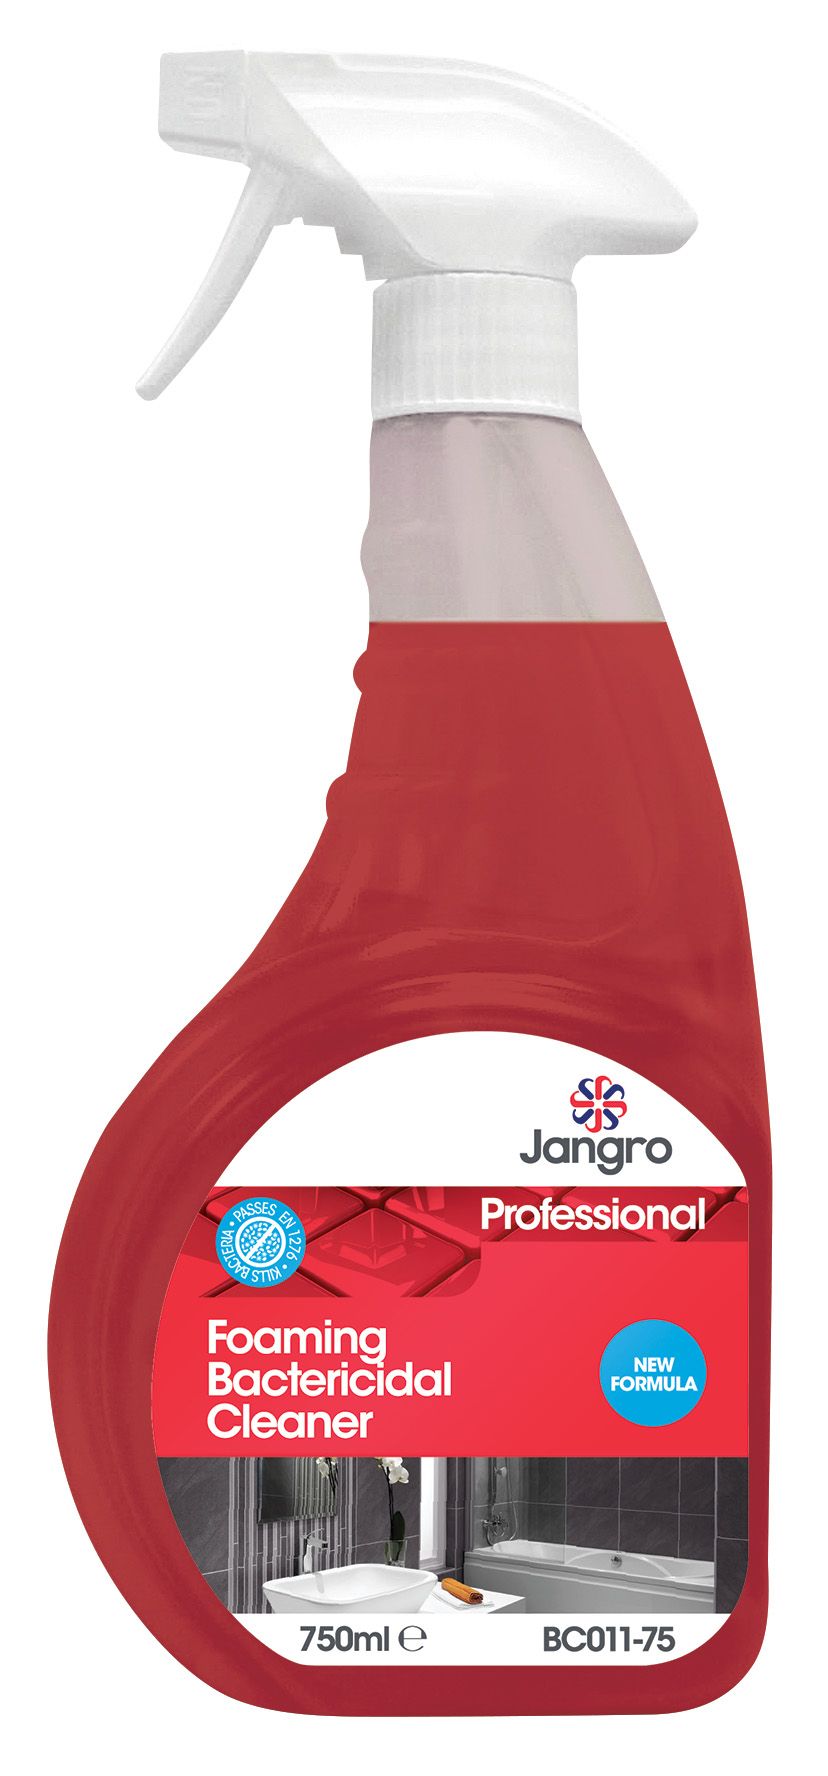 Professional Foaming Bactericidal Cleaner 750ml